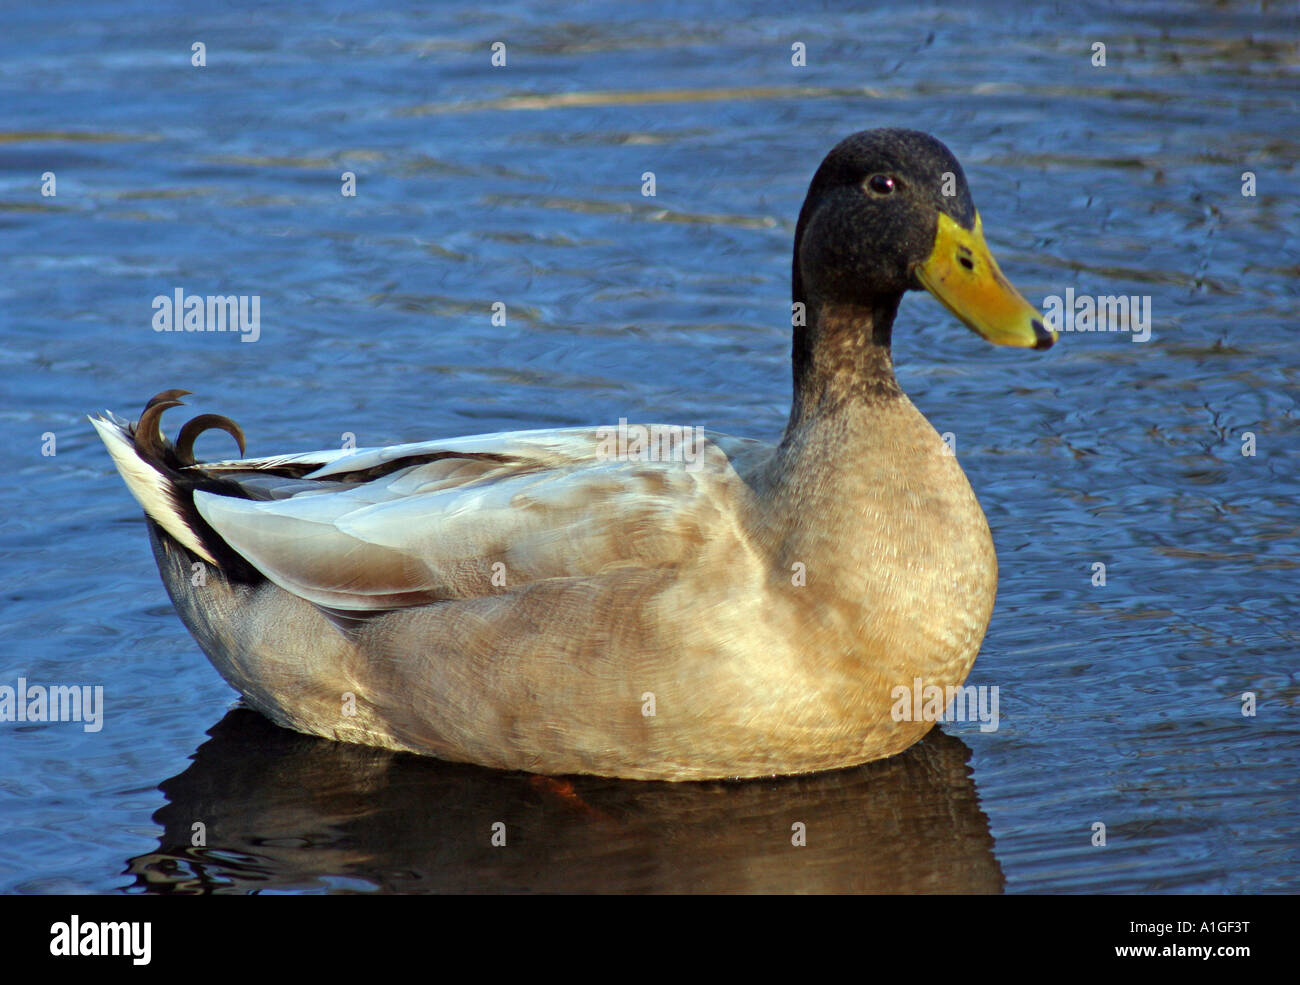 Golden colored Duck floating in pond Stock Photo